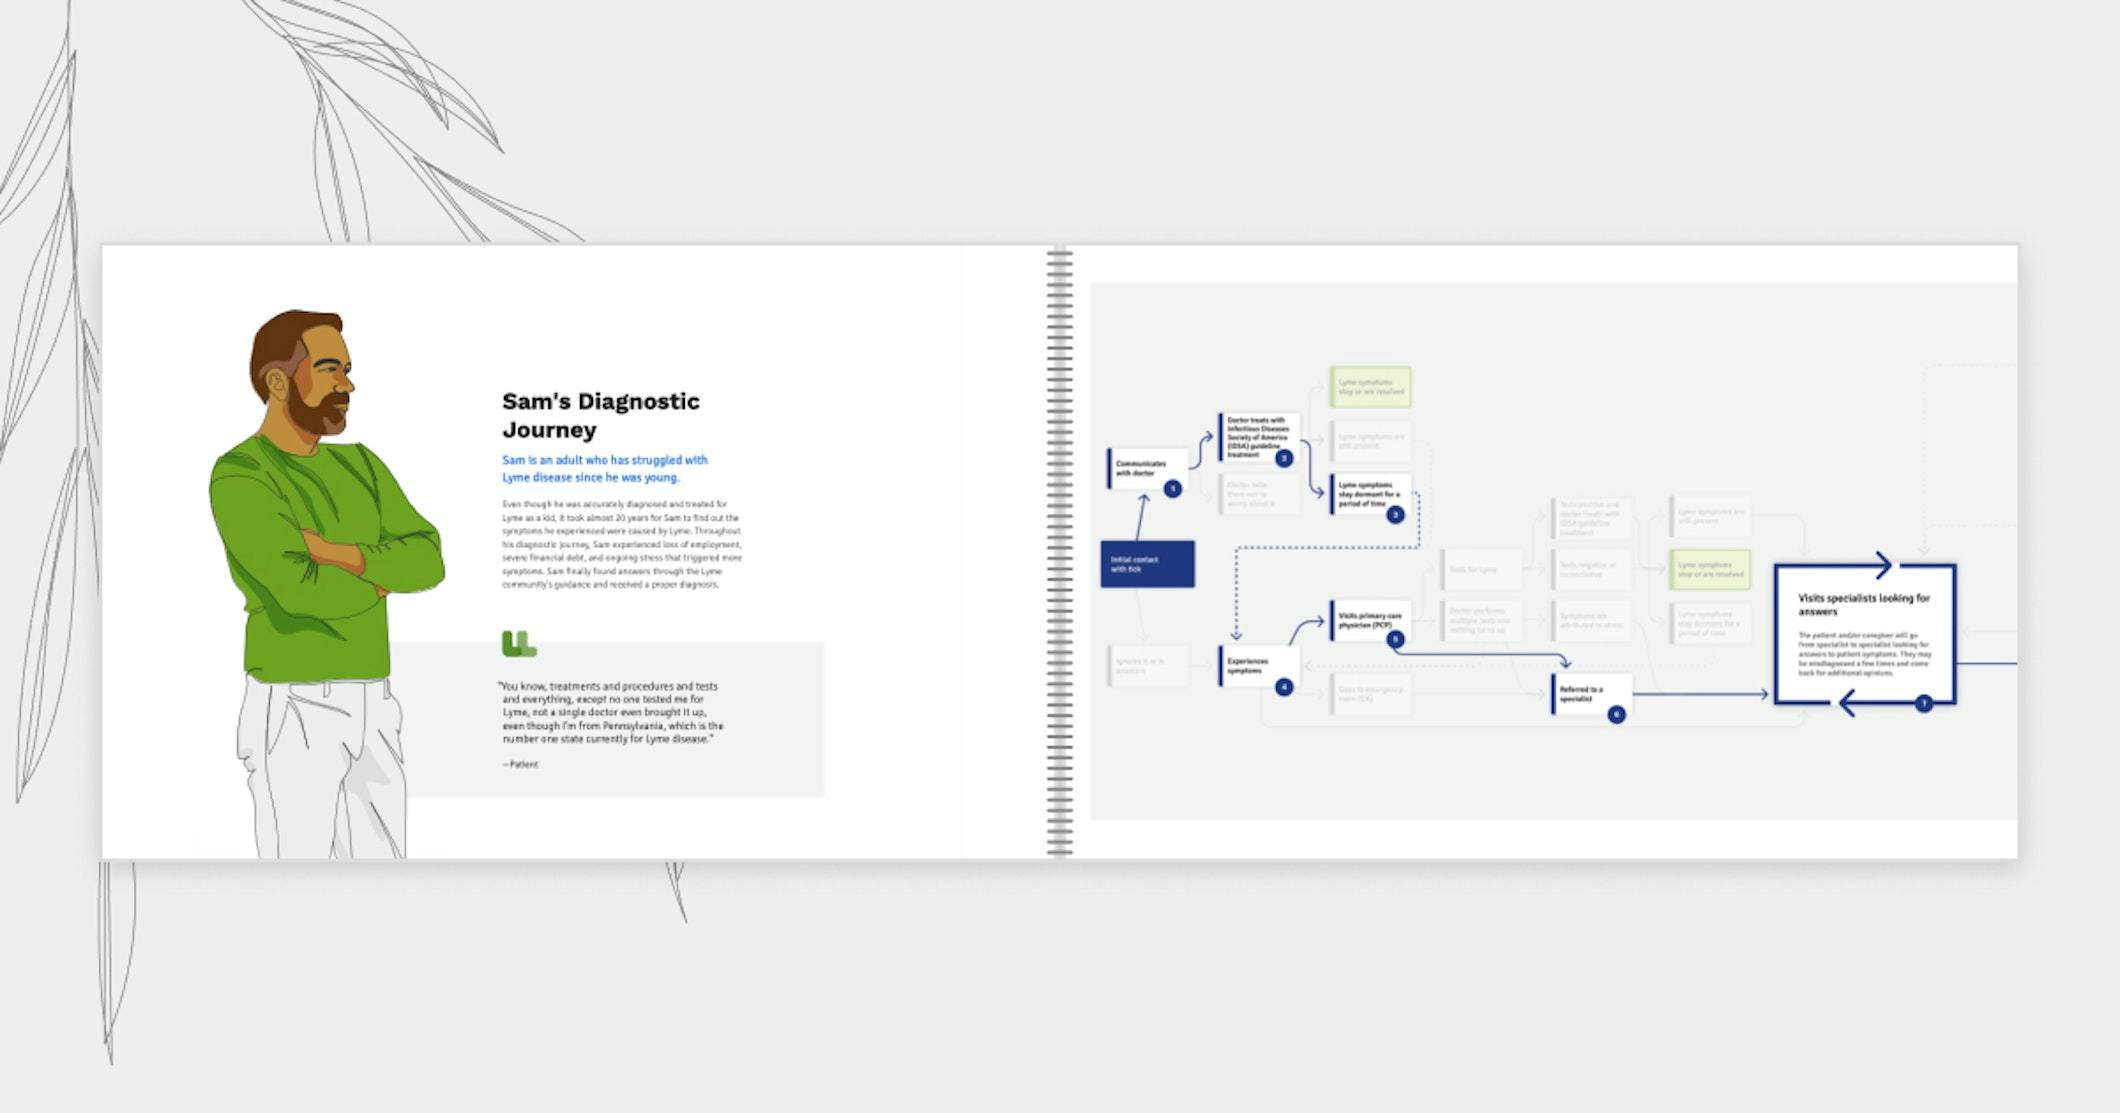 Image of a page spread from the Human Centered Design report.